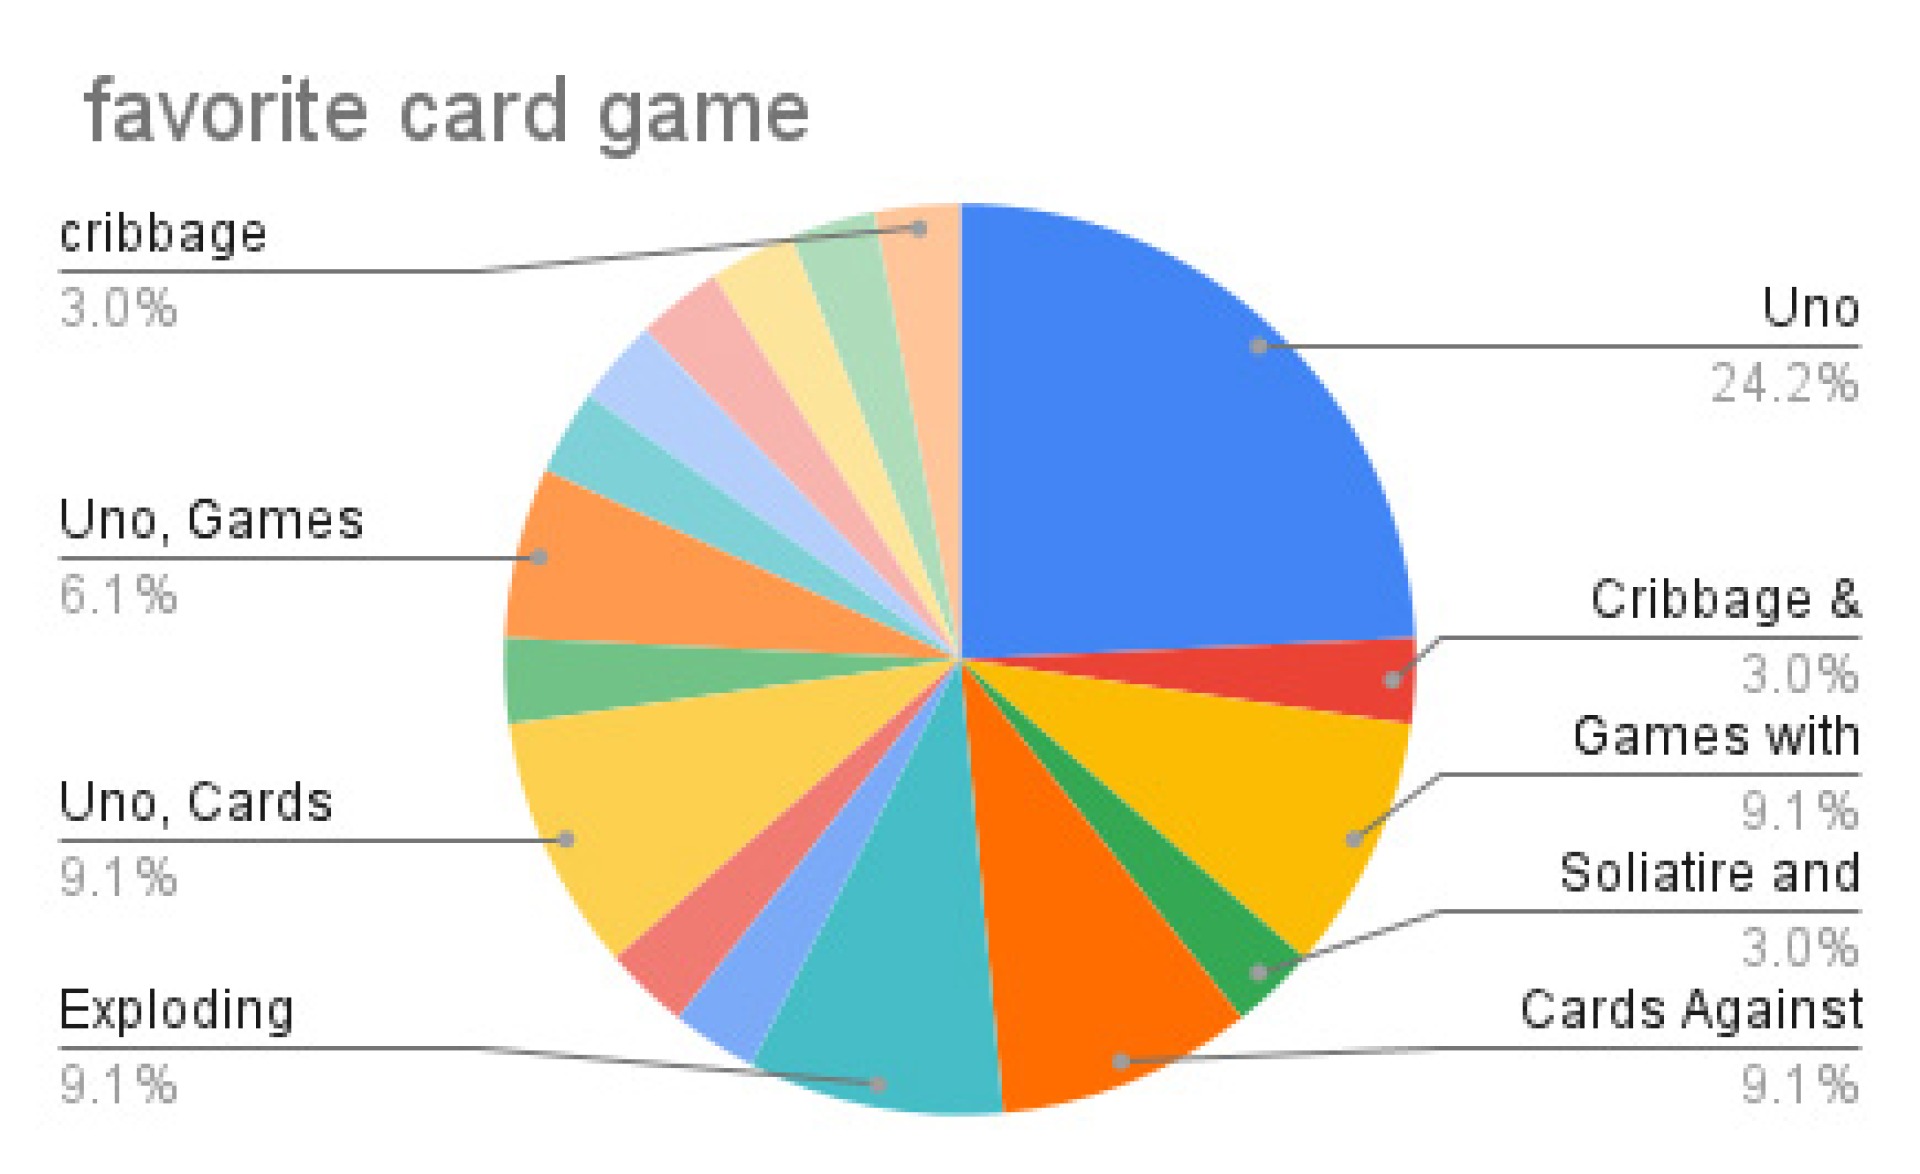 Cribbage 3.0%, Uno, Games 6.1 %, Uno, Cards 9.1 %, Exploding 9.1%, Uno 24.2%, Cribbage & 3.0%, GAmes with 9.1%, Soliatire and 3.0%, Cards Against 9.1%